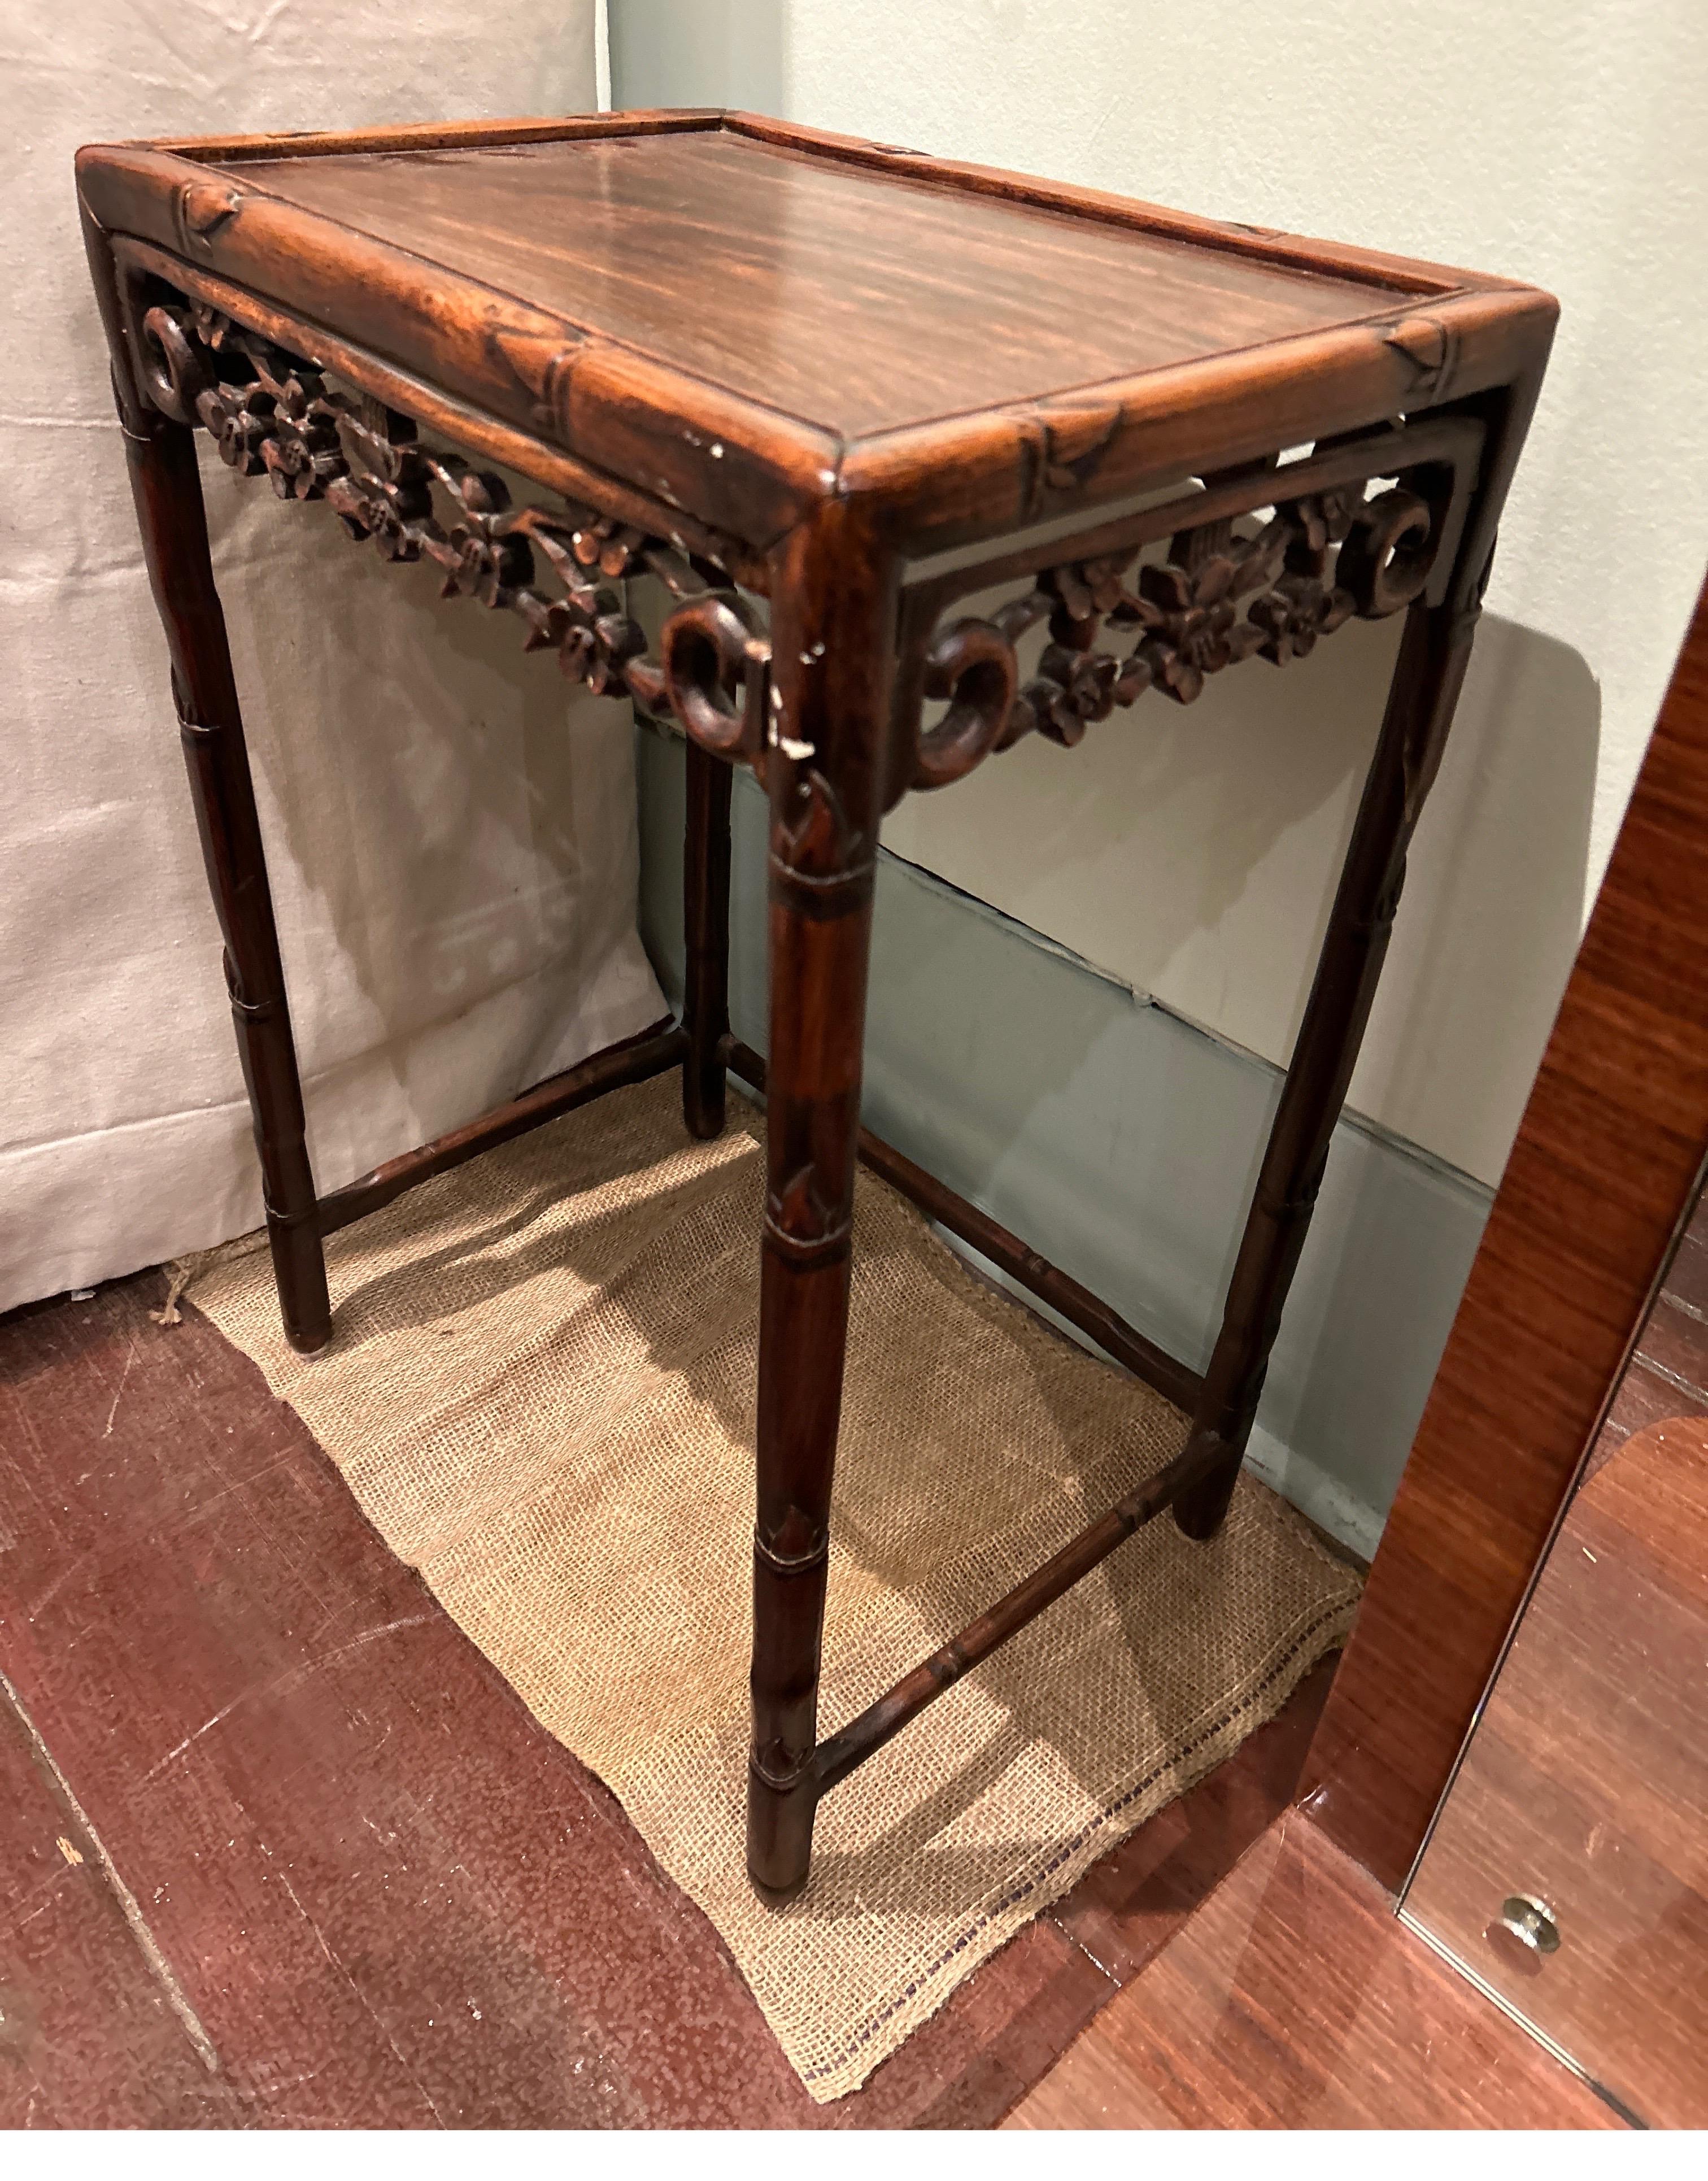 Late Qing Dynasty Rosewood Export Side Table Carved With Floral Bamboo Theme For Sale 3